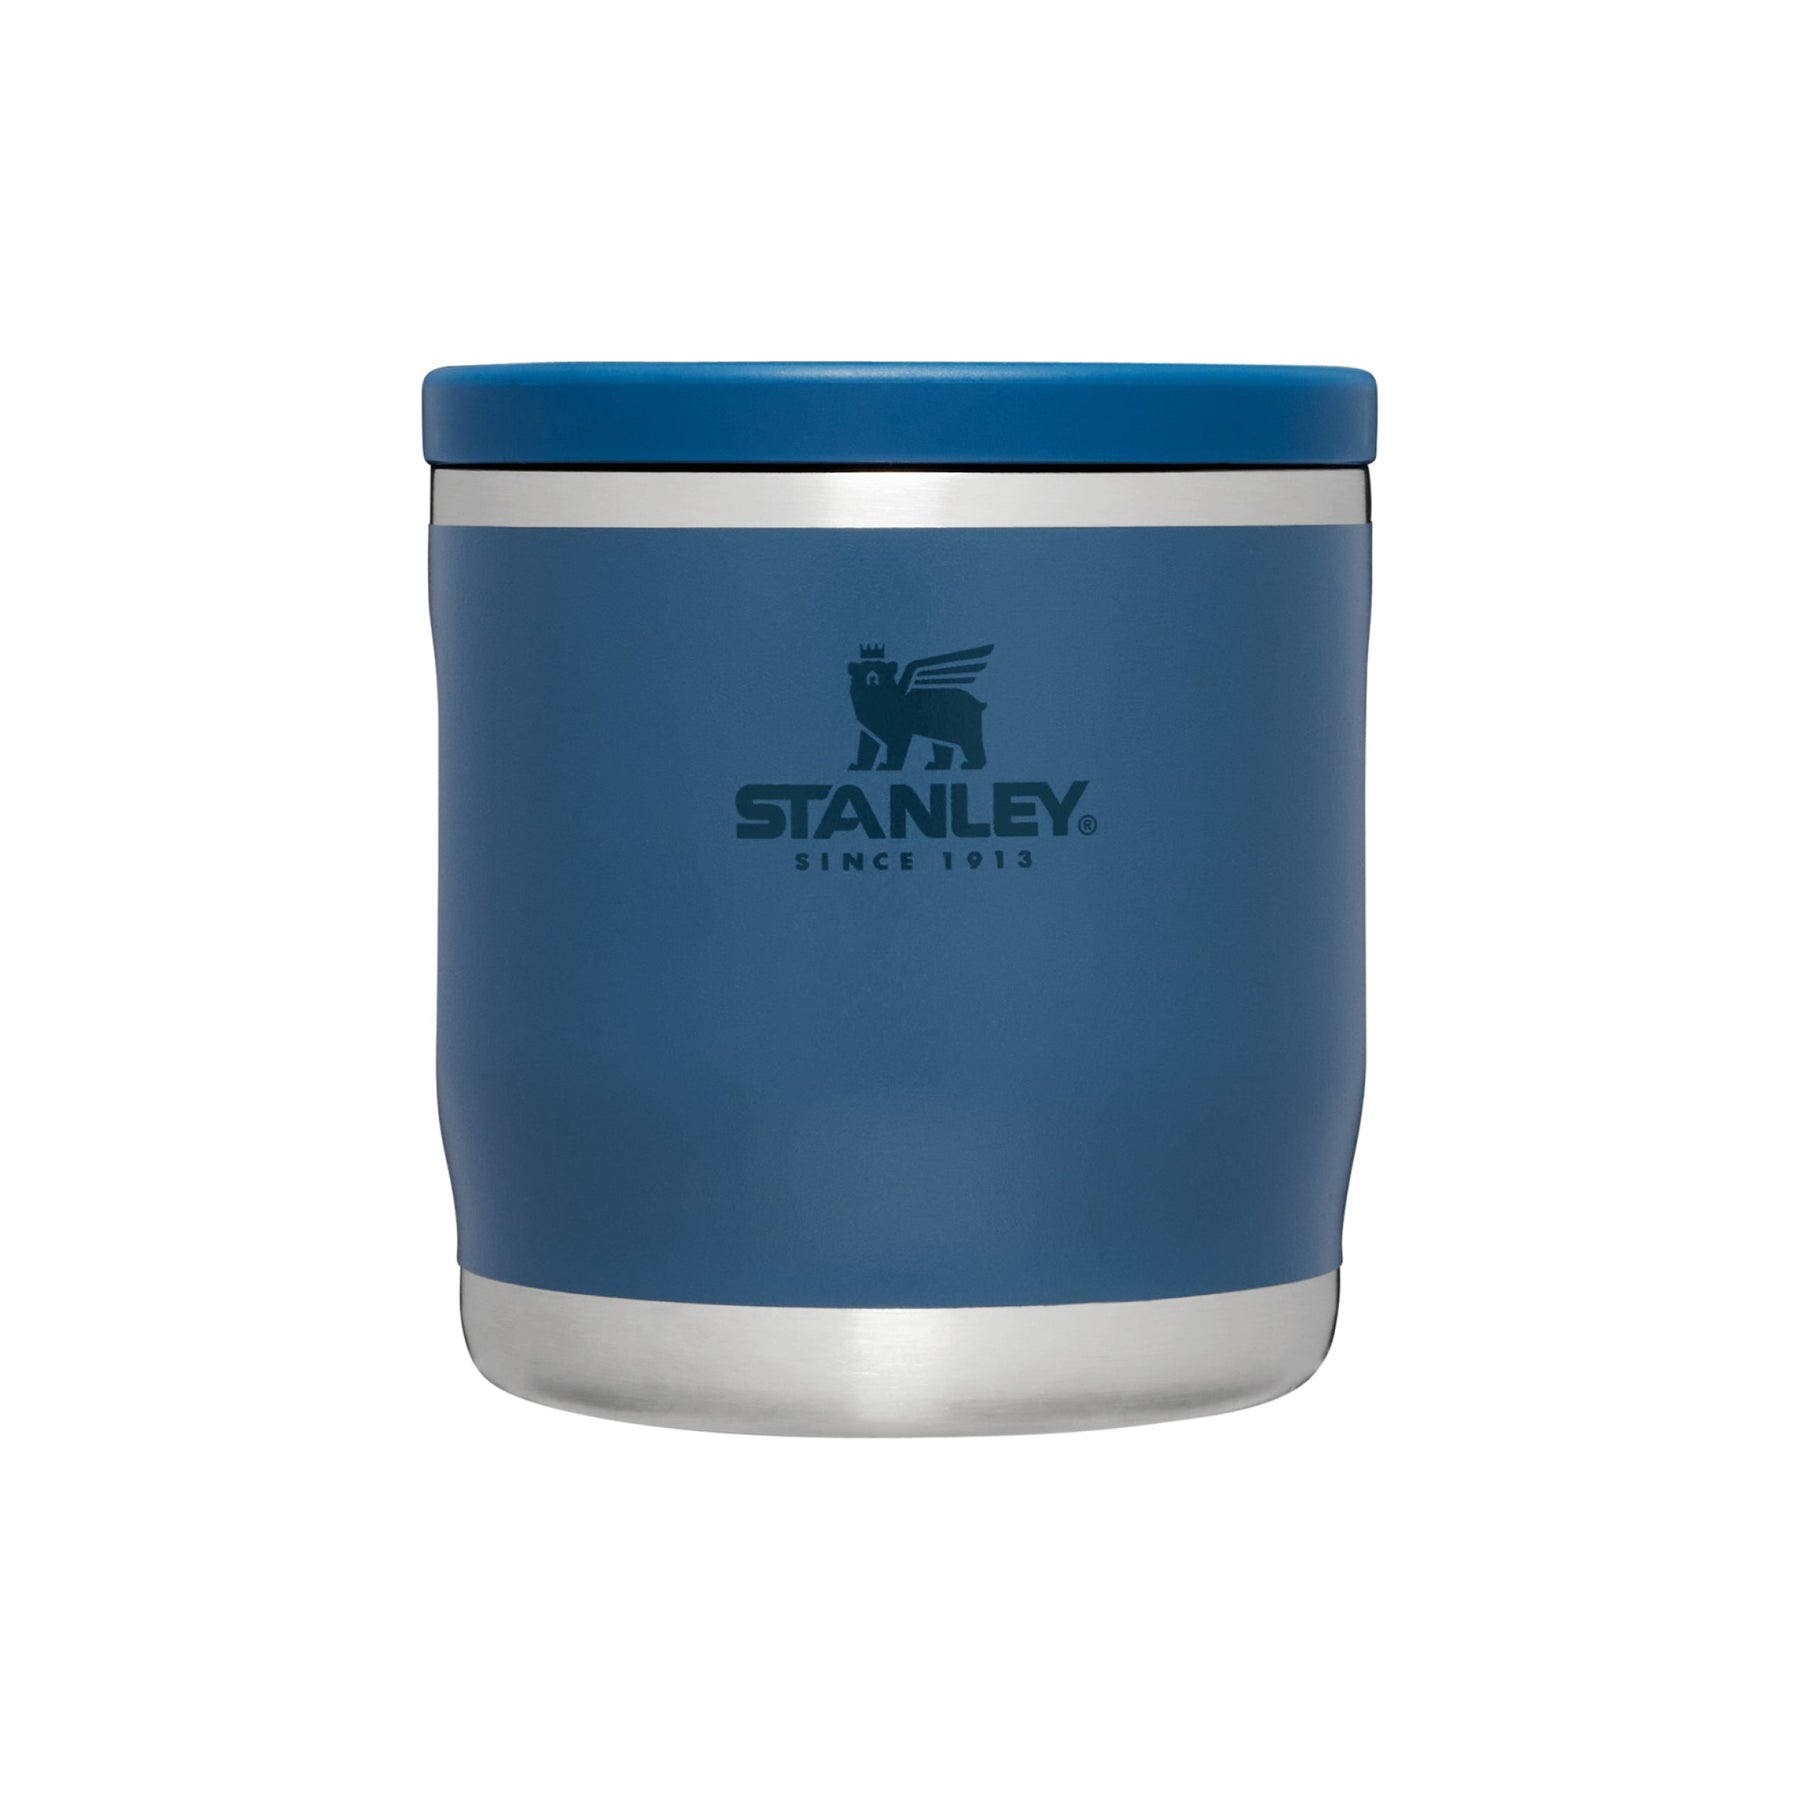 THE ADVENTURE TO-GO FOOD JAR - 0.35L- STANLEY